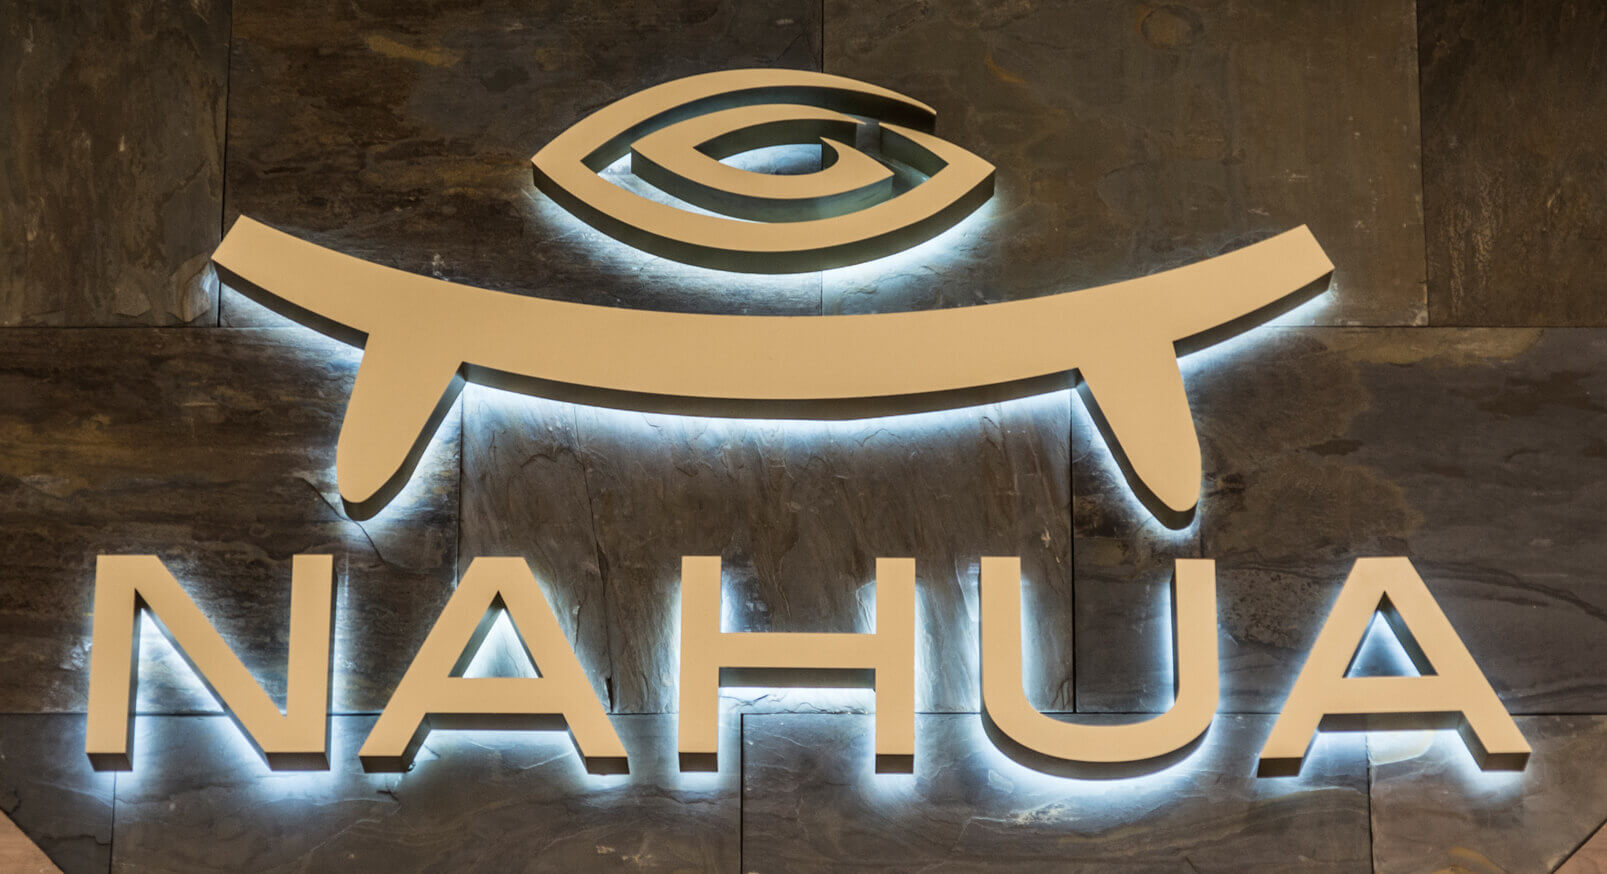 Nahua - Nahua - LED light letters placed on the wall, visible halo effect